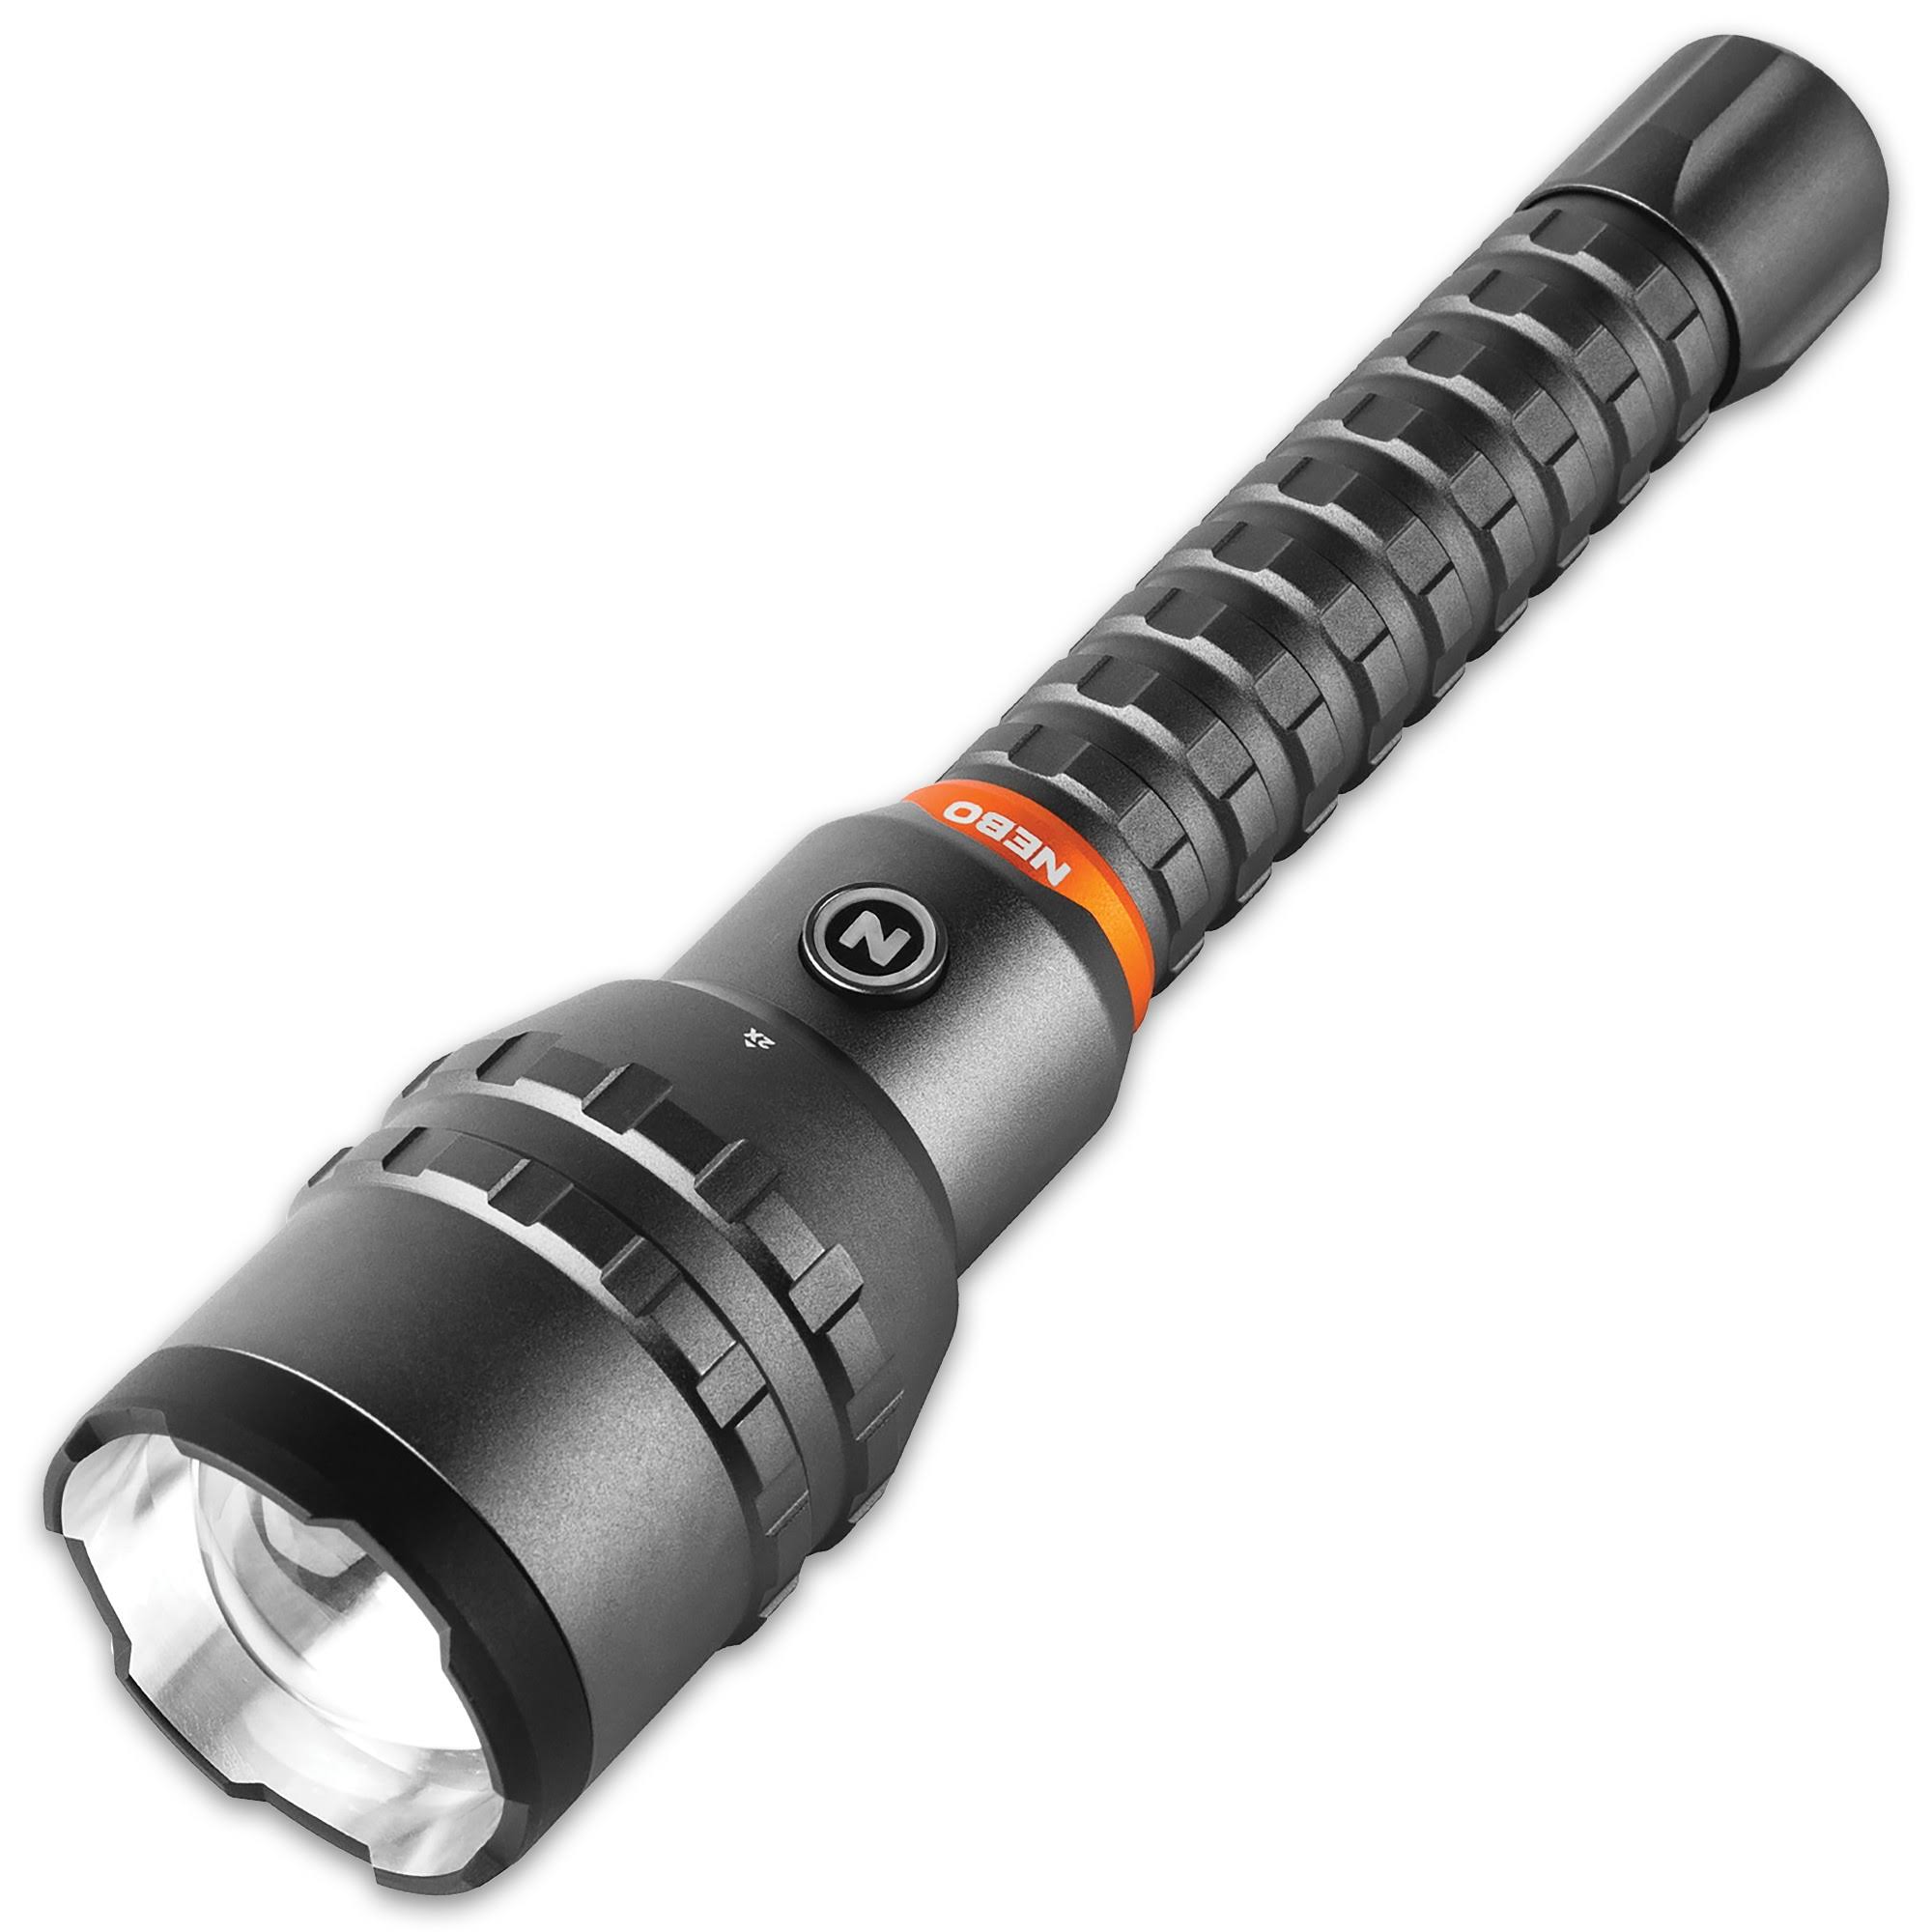 Nebo Davinci 12000,USB Rechargeable,12,000 Lumen Flashlight with 2x Zoom, 5 Light Modes, Waterproof (IP67), and Power Bank, Bright Flashlight for